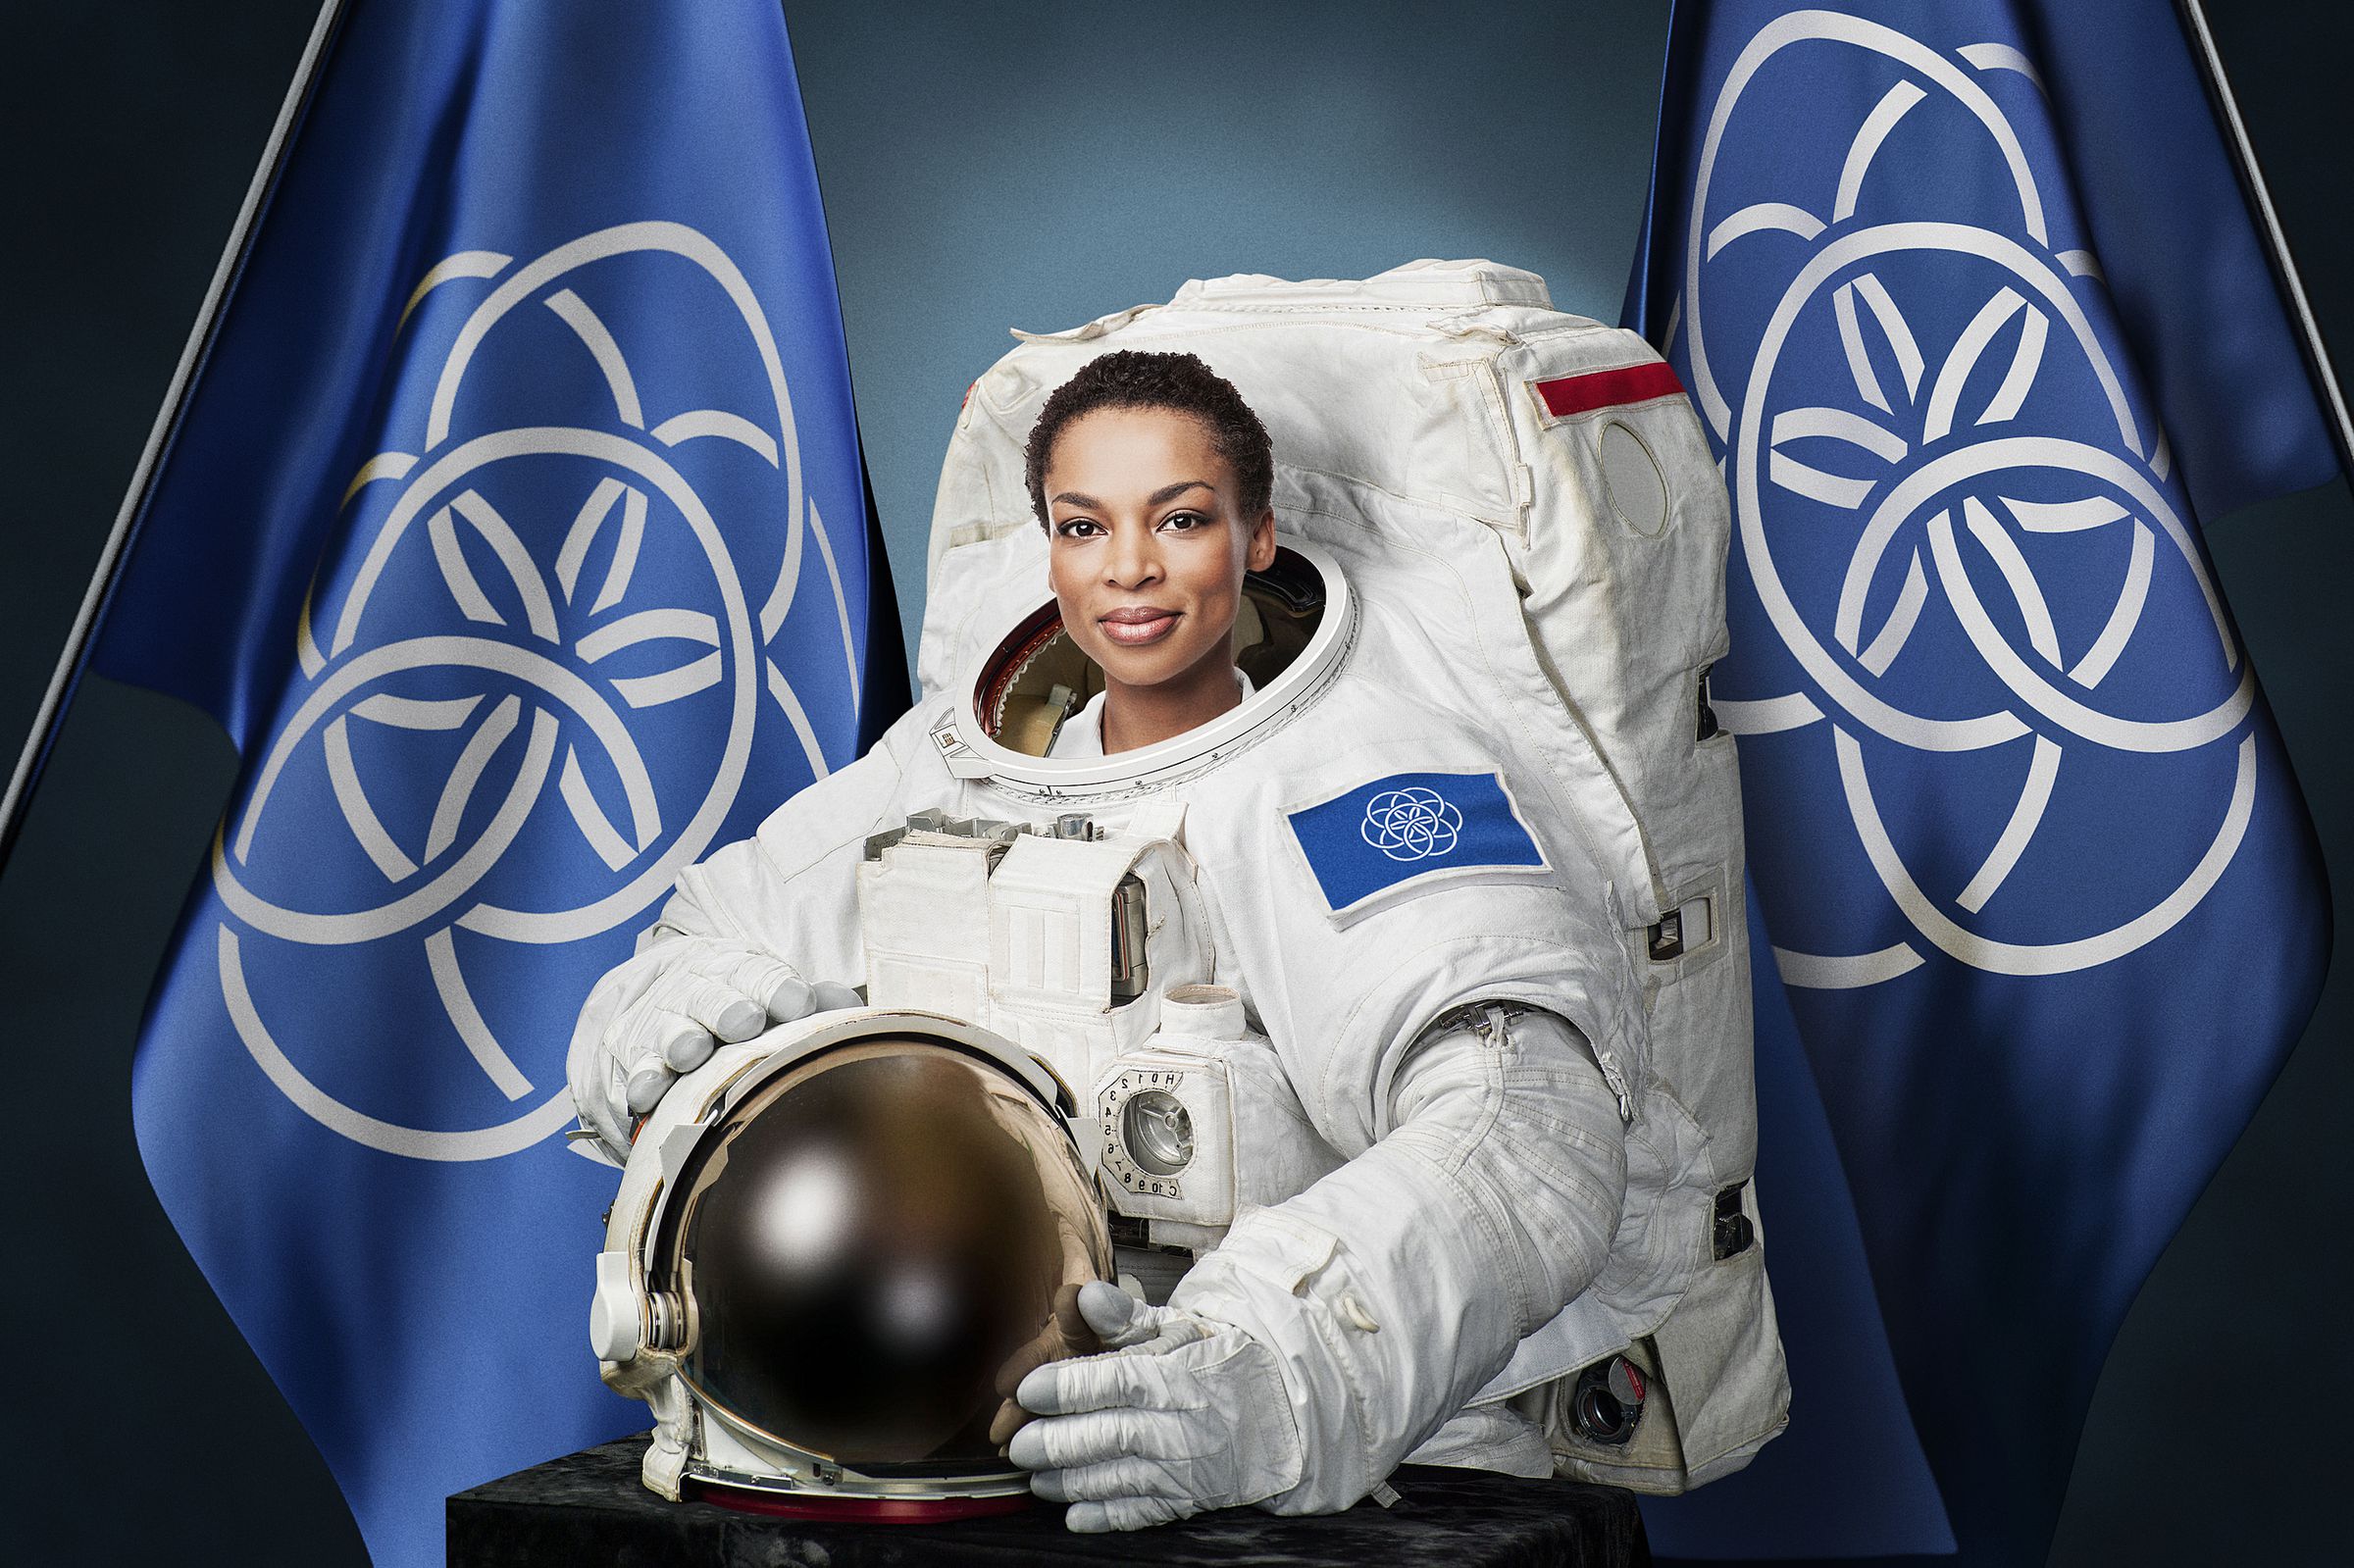 International Flag of Planet Earth images